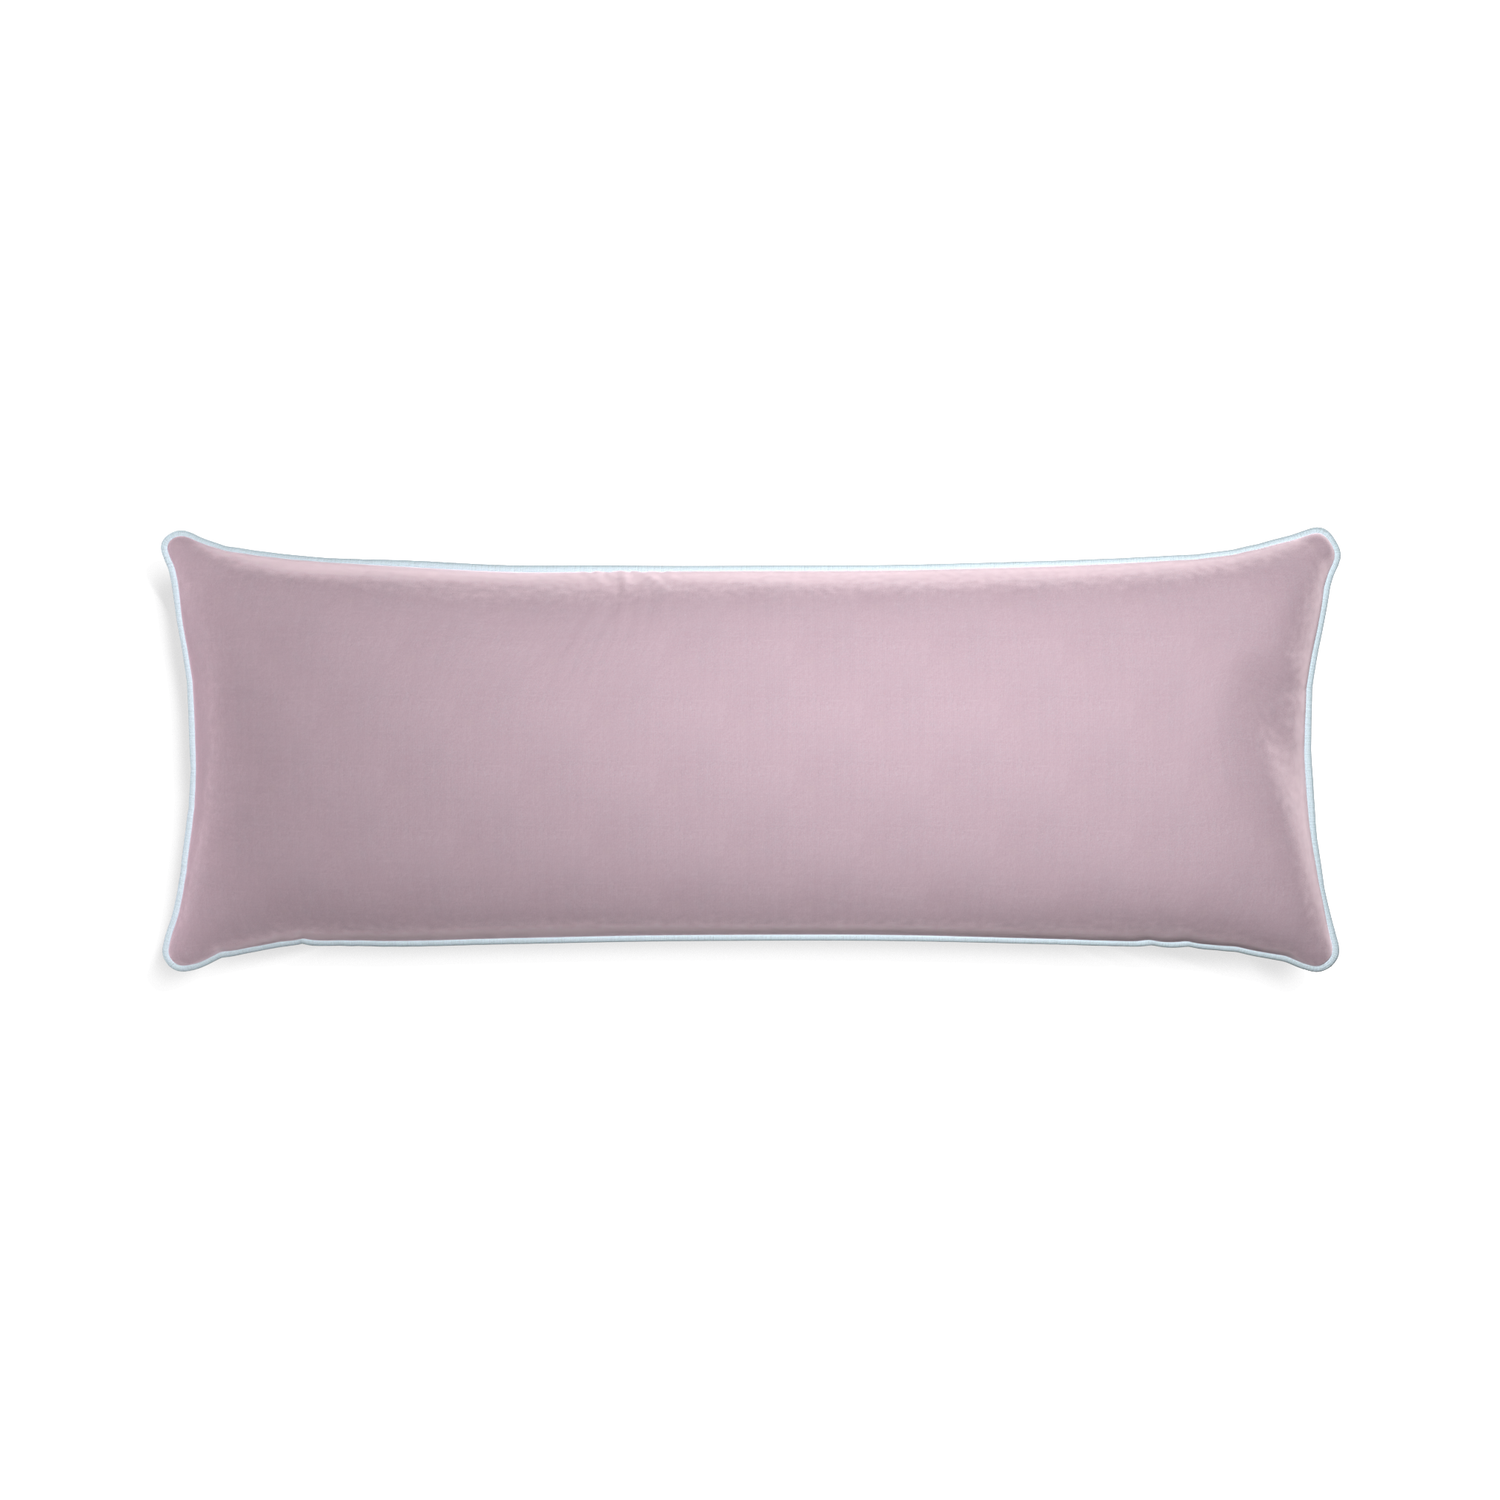 Xl-lumbar lilac velvet custom pillow with powder piping on white background